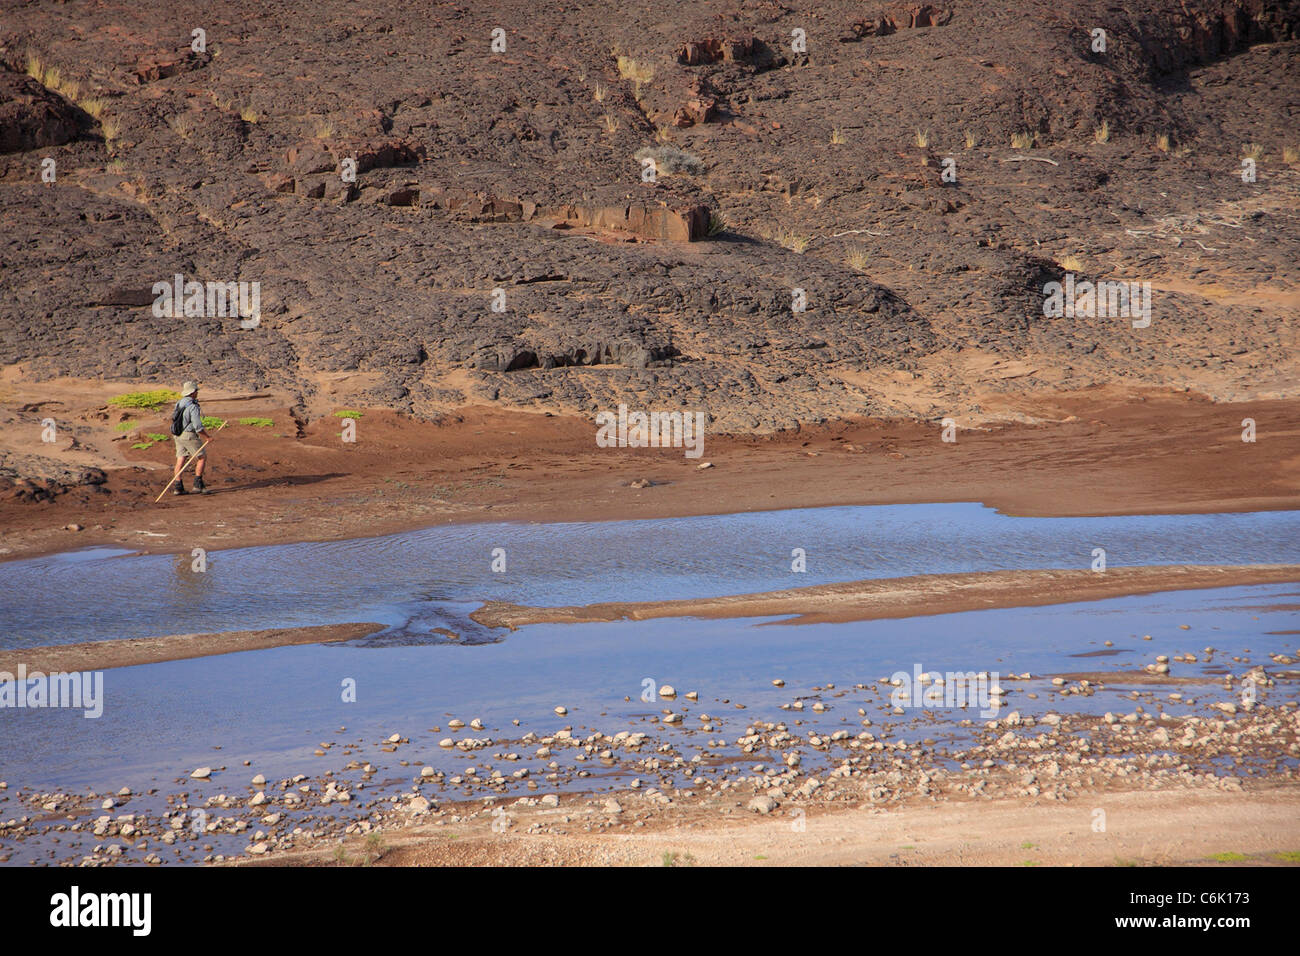 Lone hiker walking with walking stick along a shallow river Stock Photo